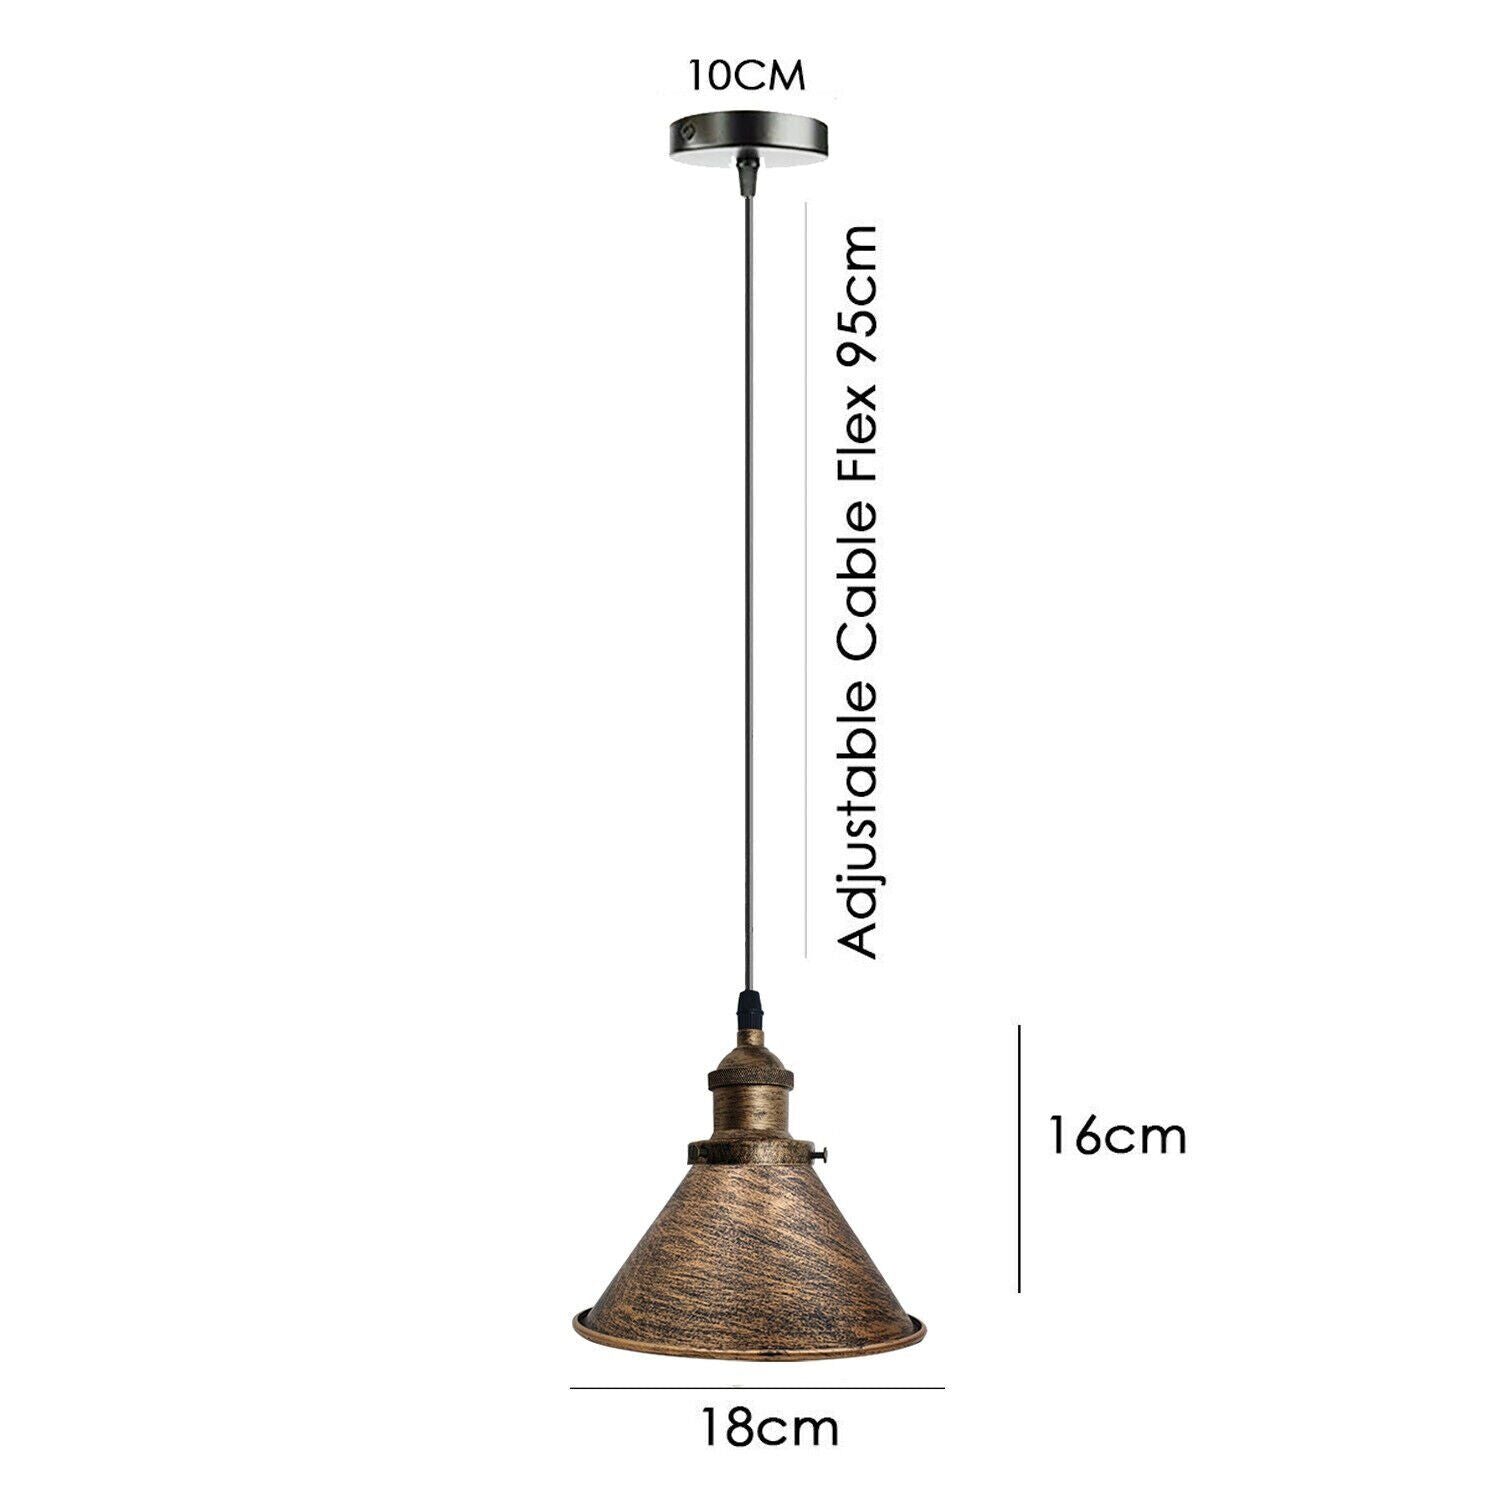 Adjustable Cable ceiling pendant light cone lampshade